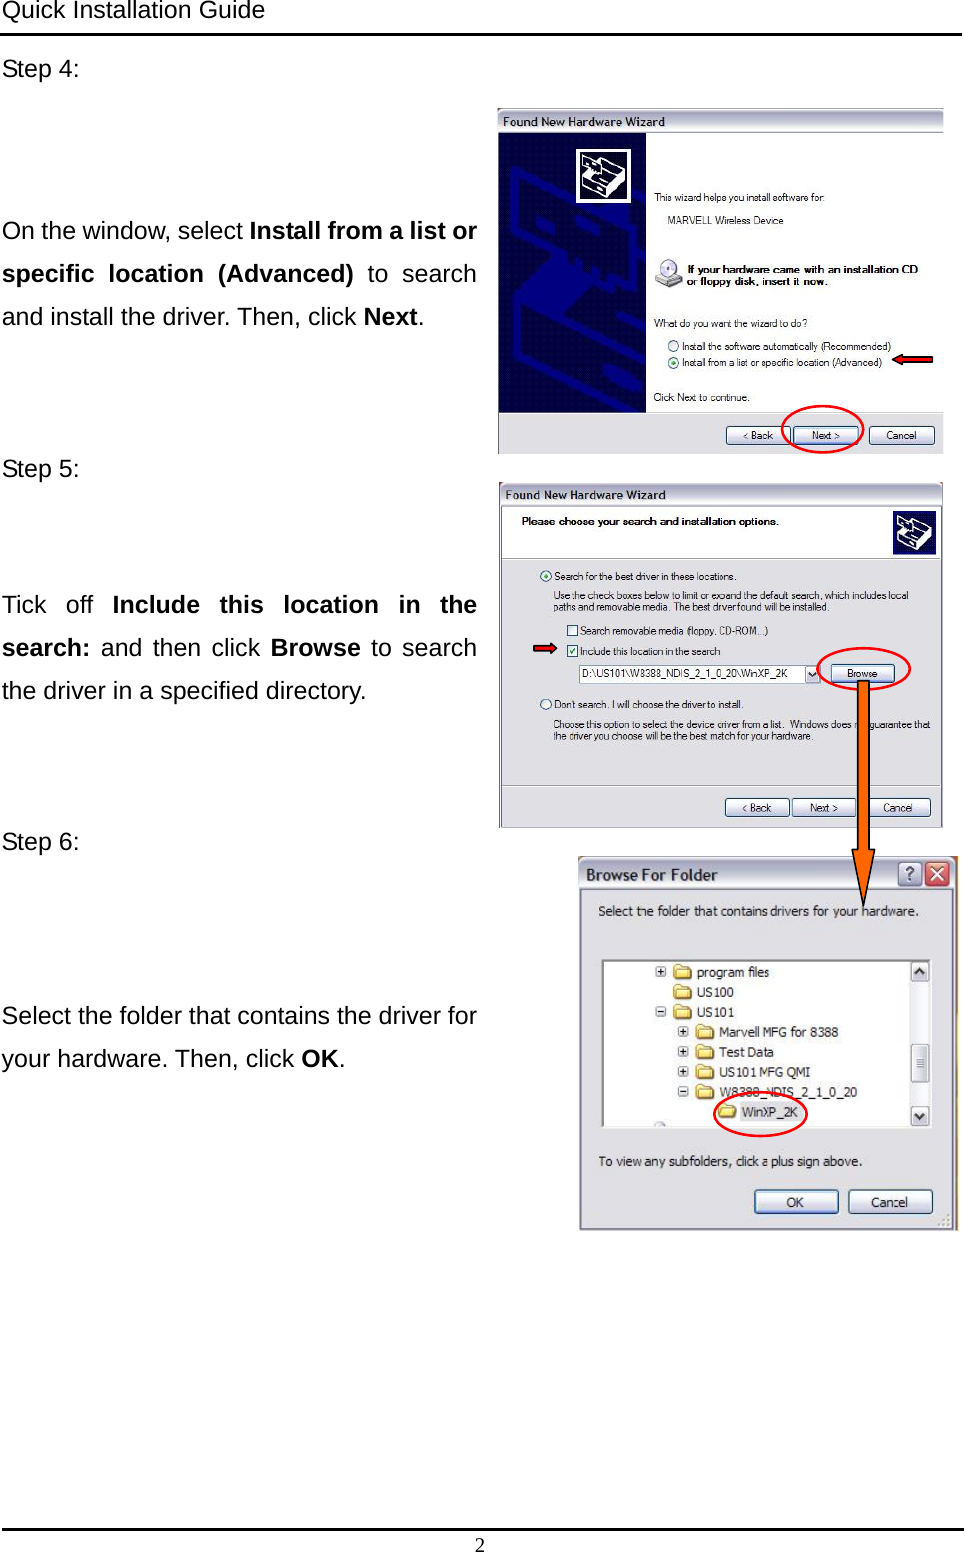 Quick Installation Guide   Step 4:   On the window, select Install from a list or specific location (Advanced) to search and install the driver. Then, click Next. Step 5: Tick off Include this location in the search: and then click Browse to search the driver in a specified directory.      Step 6: Select the folder that contains the driver for your hardware. Then, click OK.  2 